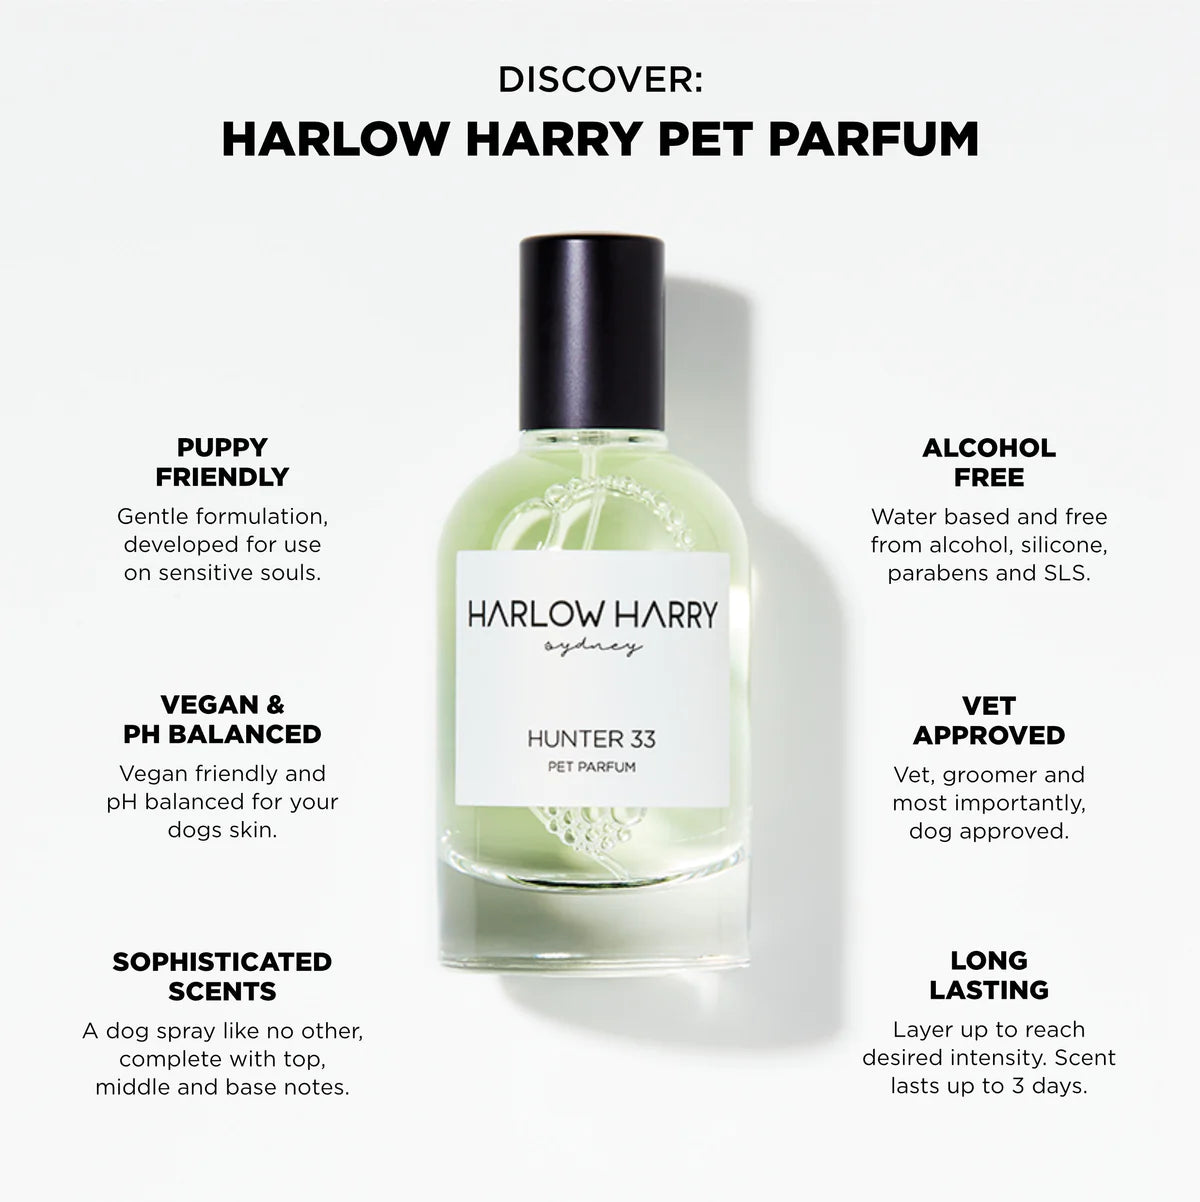 Elegant Hunter 33 Dog Perfume by Harlow Harry pet perfume bottle against a clean background with descriptive text highlighting its gentle, alcohol-free, vegan and pH-balanced formula, and the assurance of being vet approved with a long-lasting